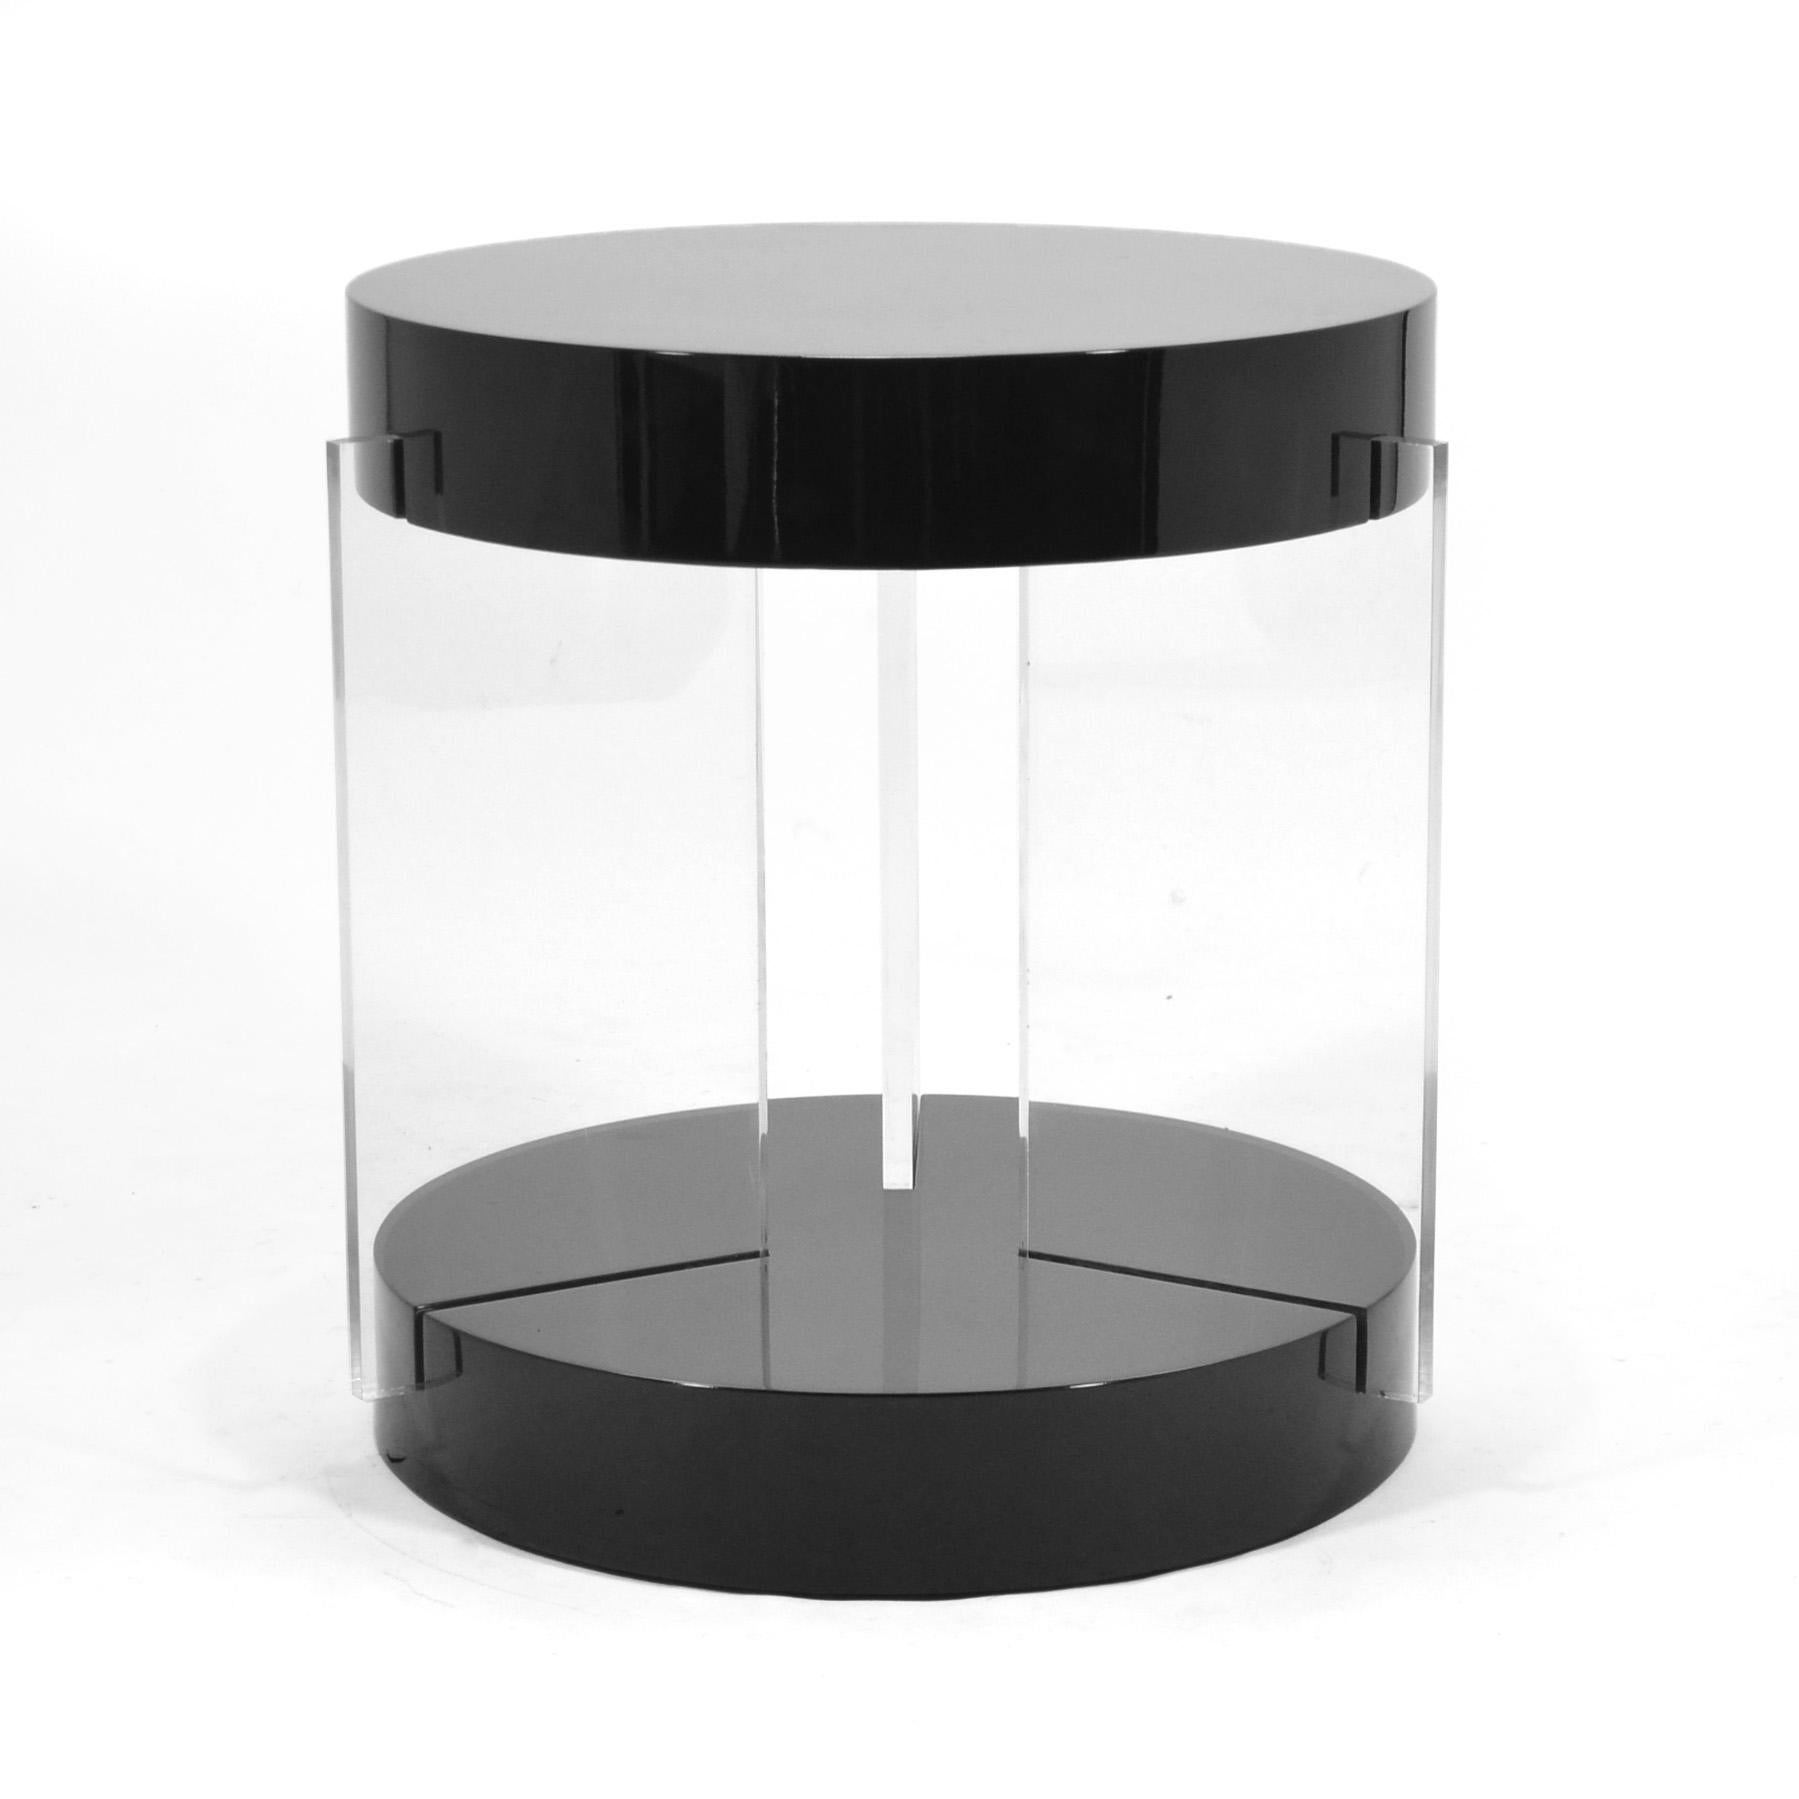 A compelling combination of luxurious materials come together in a Classic form to create a table with a wide variety of uses. This Vladimir Kagan table has a black lacquered top supported by three Lucite slab legs. The scale makes it a perfect end